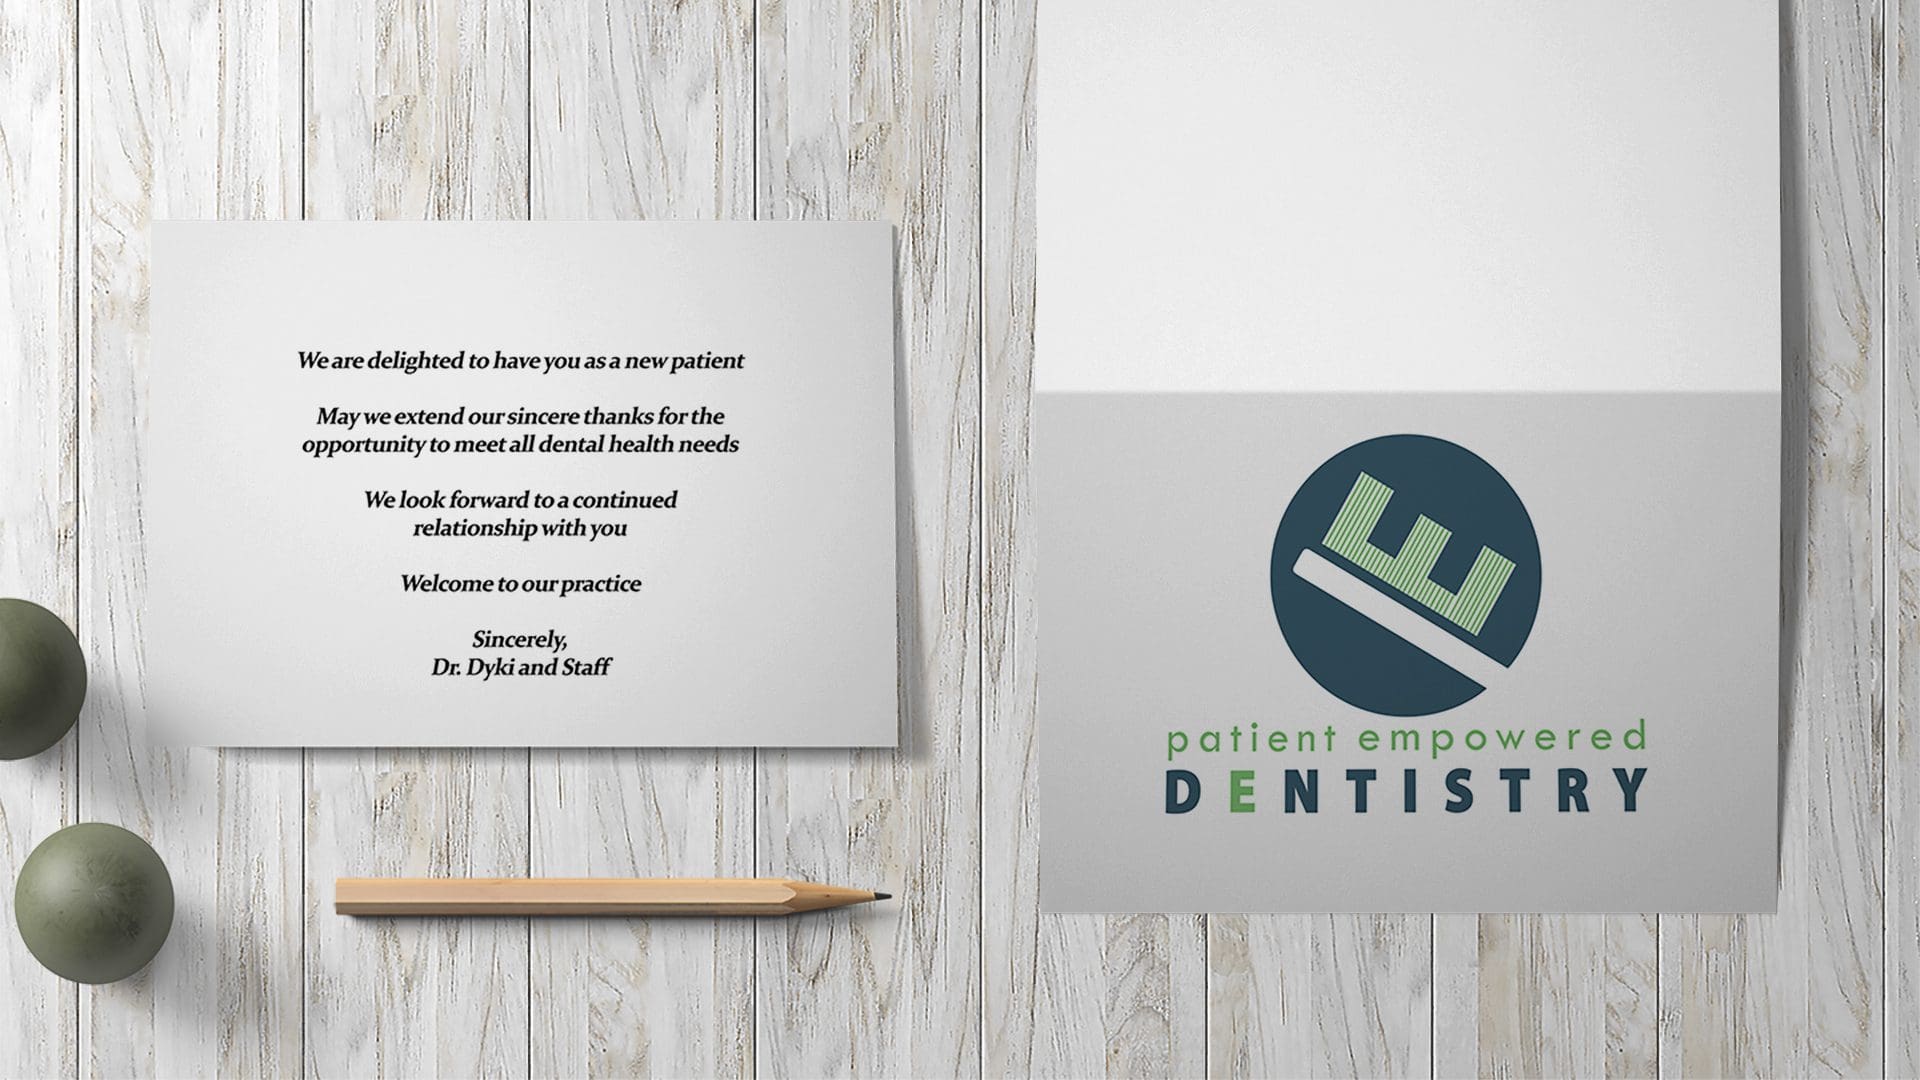 Patient Empowered Dentistry - New Patient Cards Mockup 03